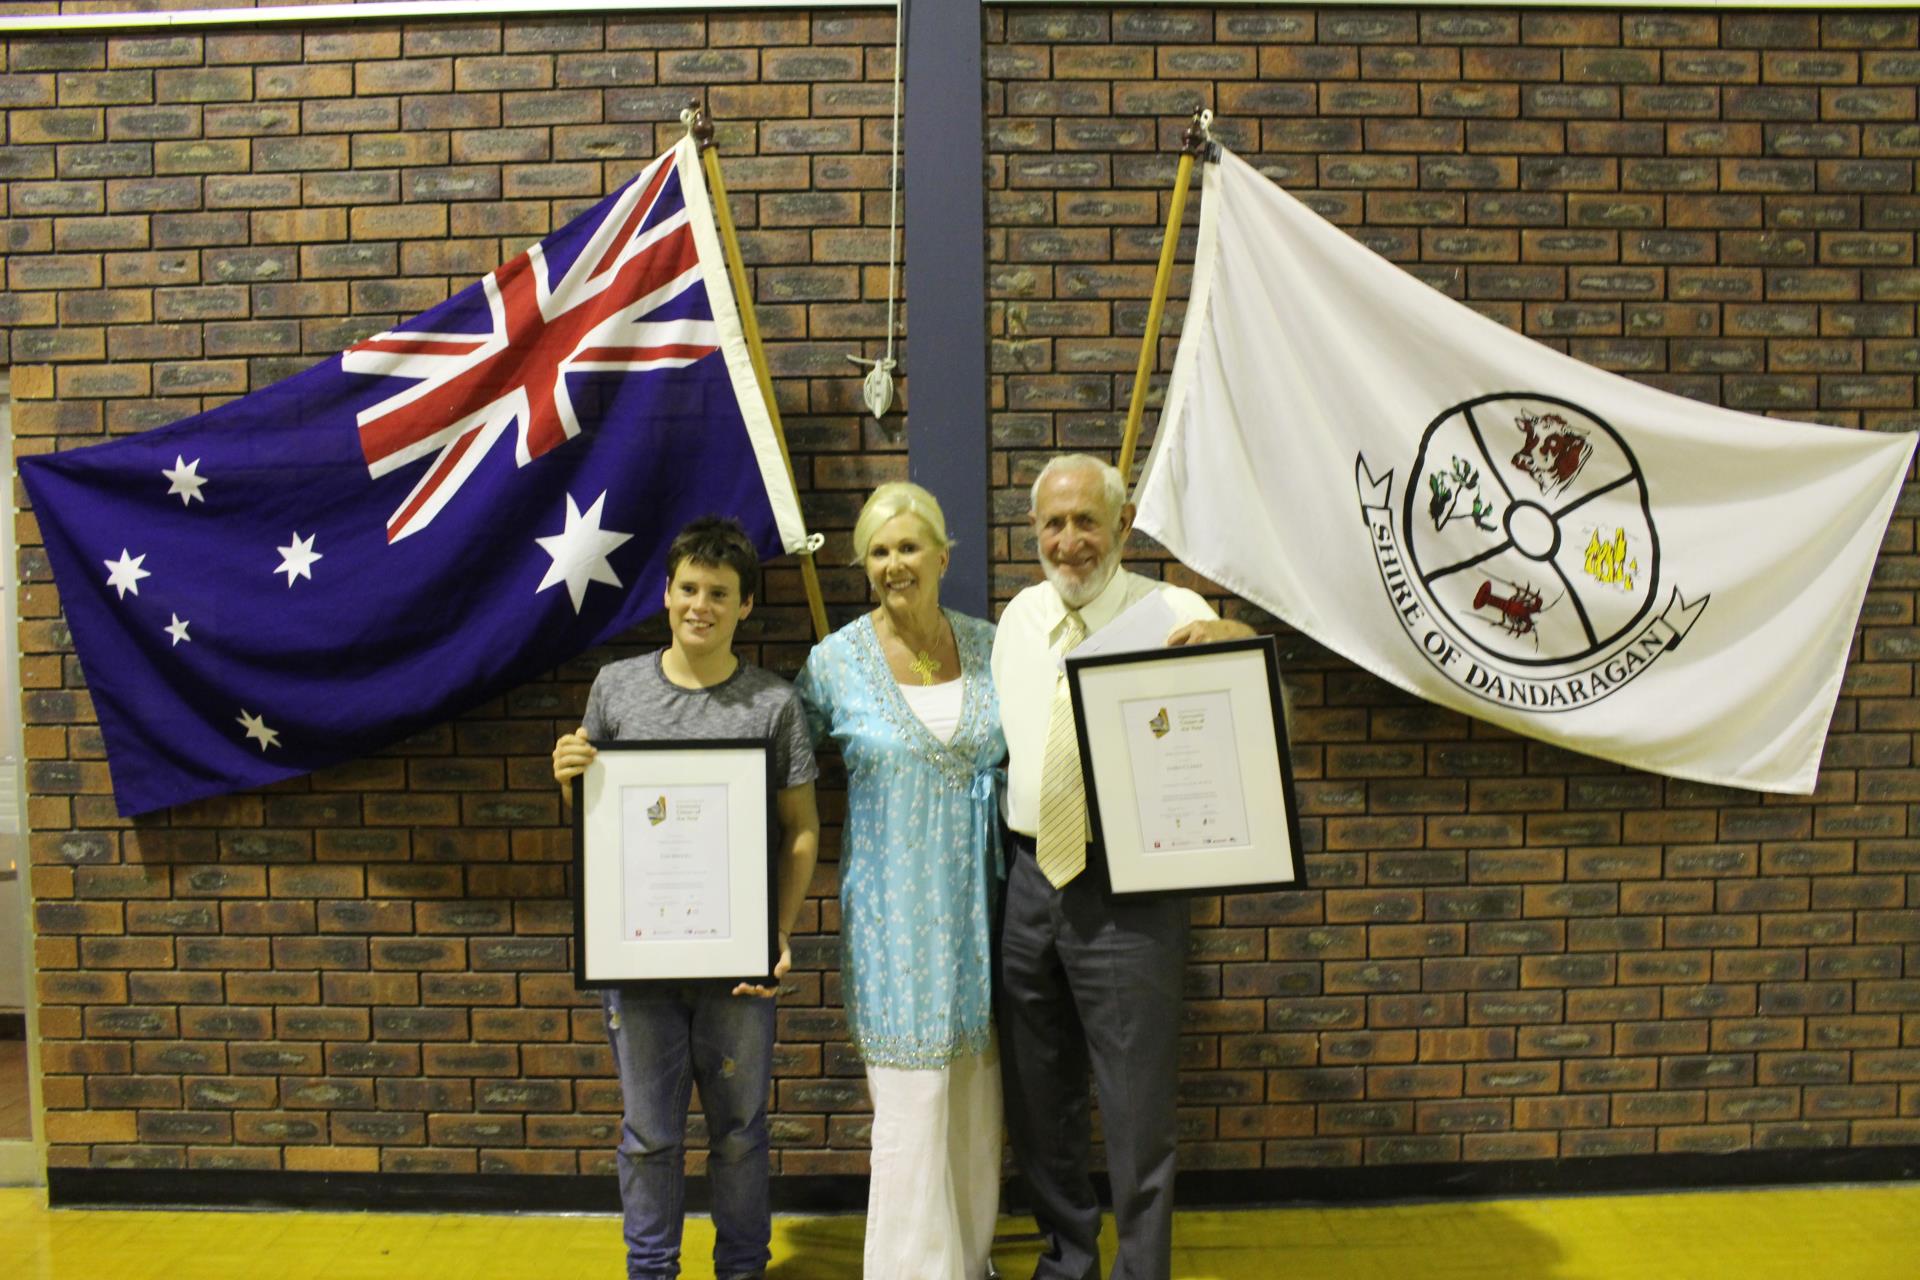 2016 Citizen of the Year and Young Citizen of the Year winners for Shire of Dandaragan